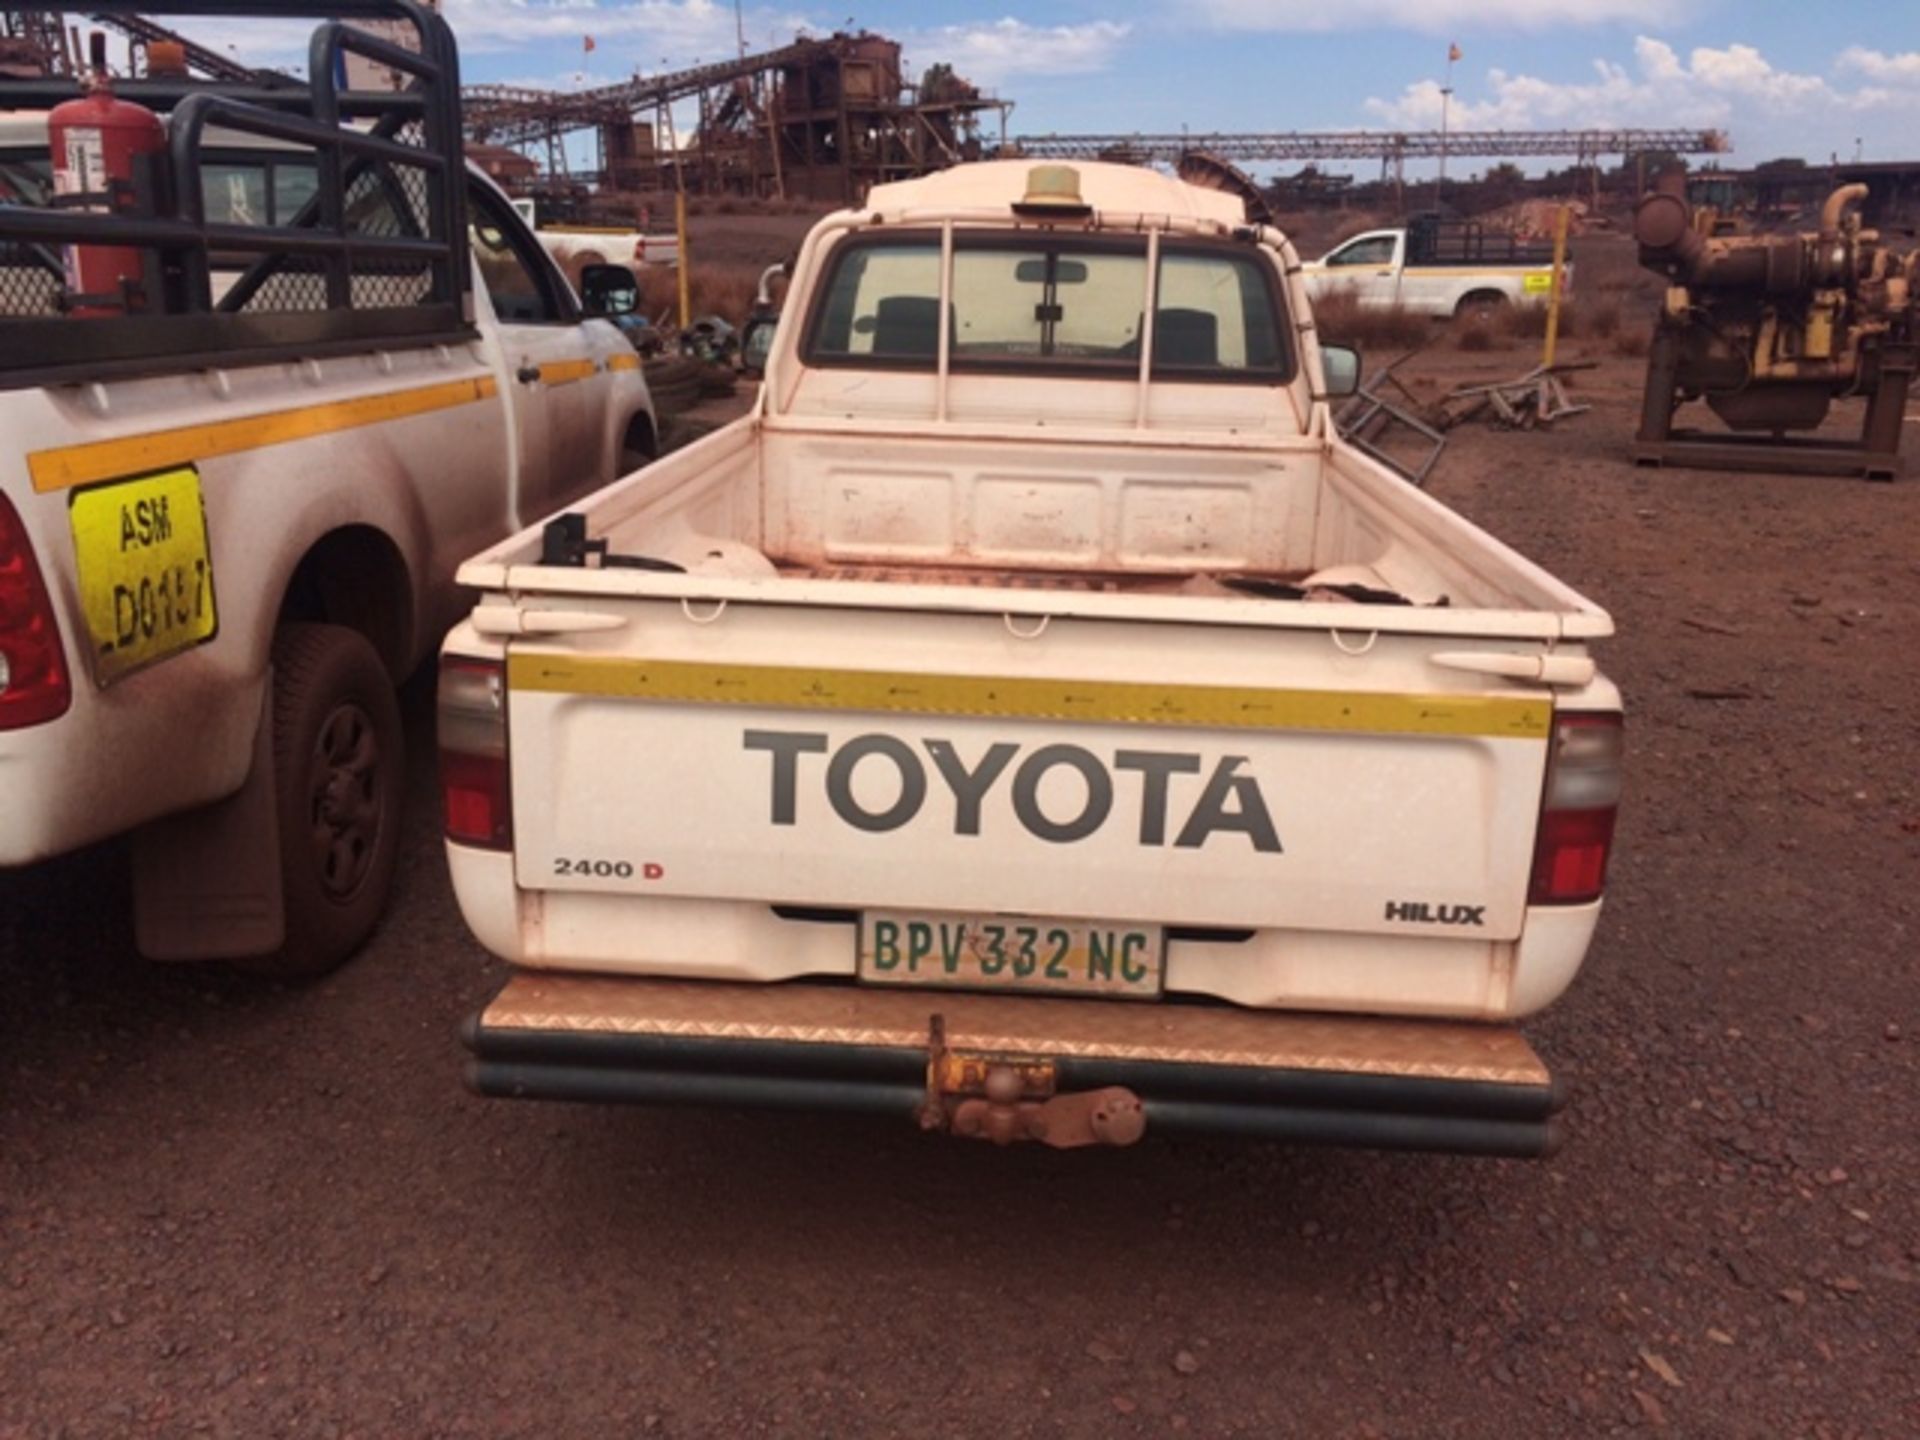 2003TOYOTA HILUX 2400DLWB 64986KM-DEREG.NO DOC FEE
(BEESHOEK)STICKERS TO BE REMOVED BEFORE DISPATCH - Image 5 of 9